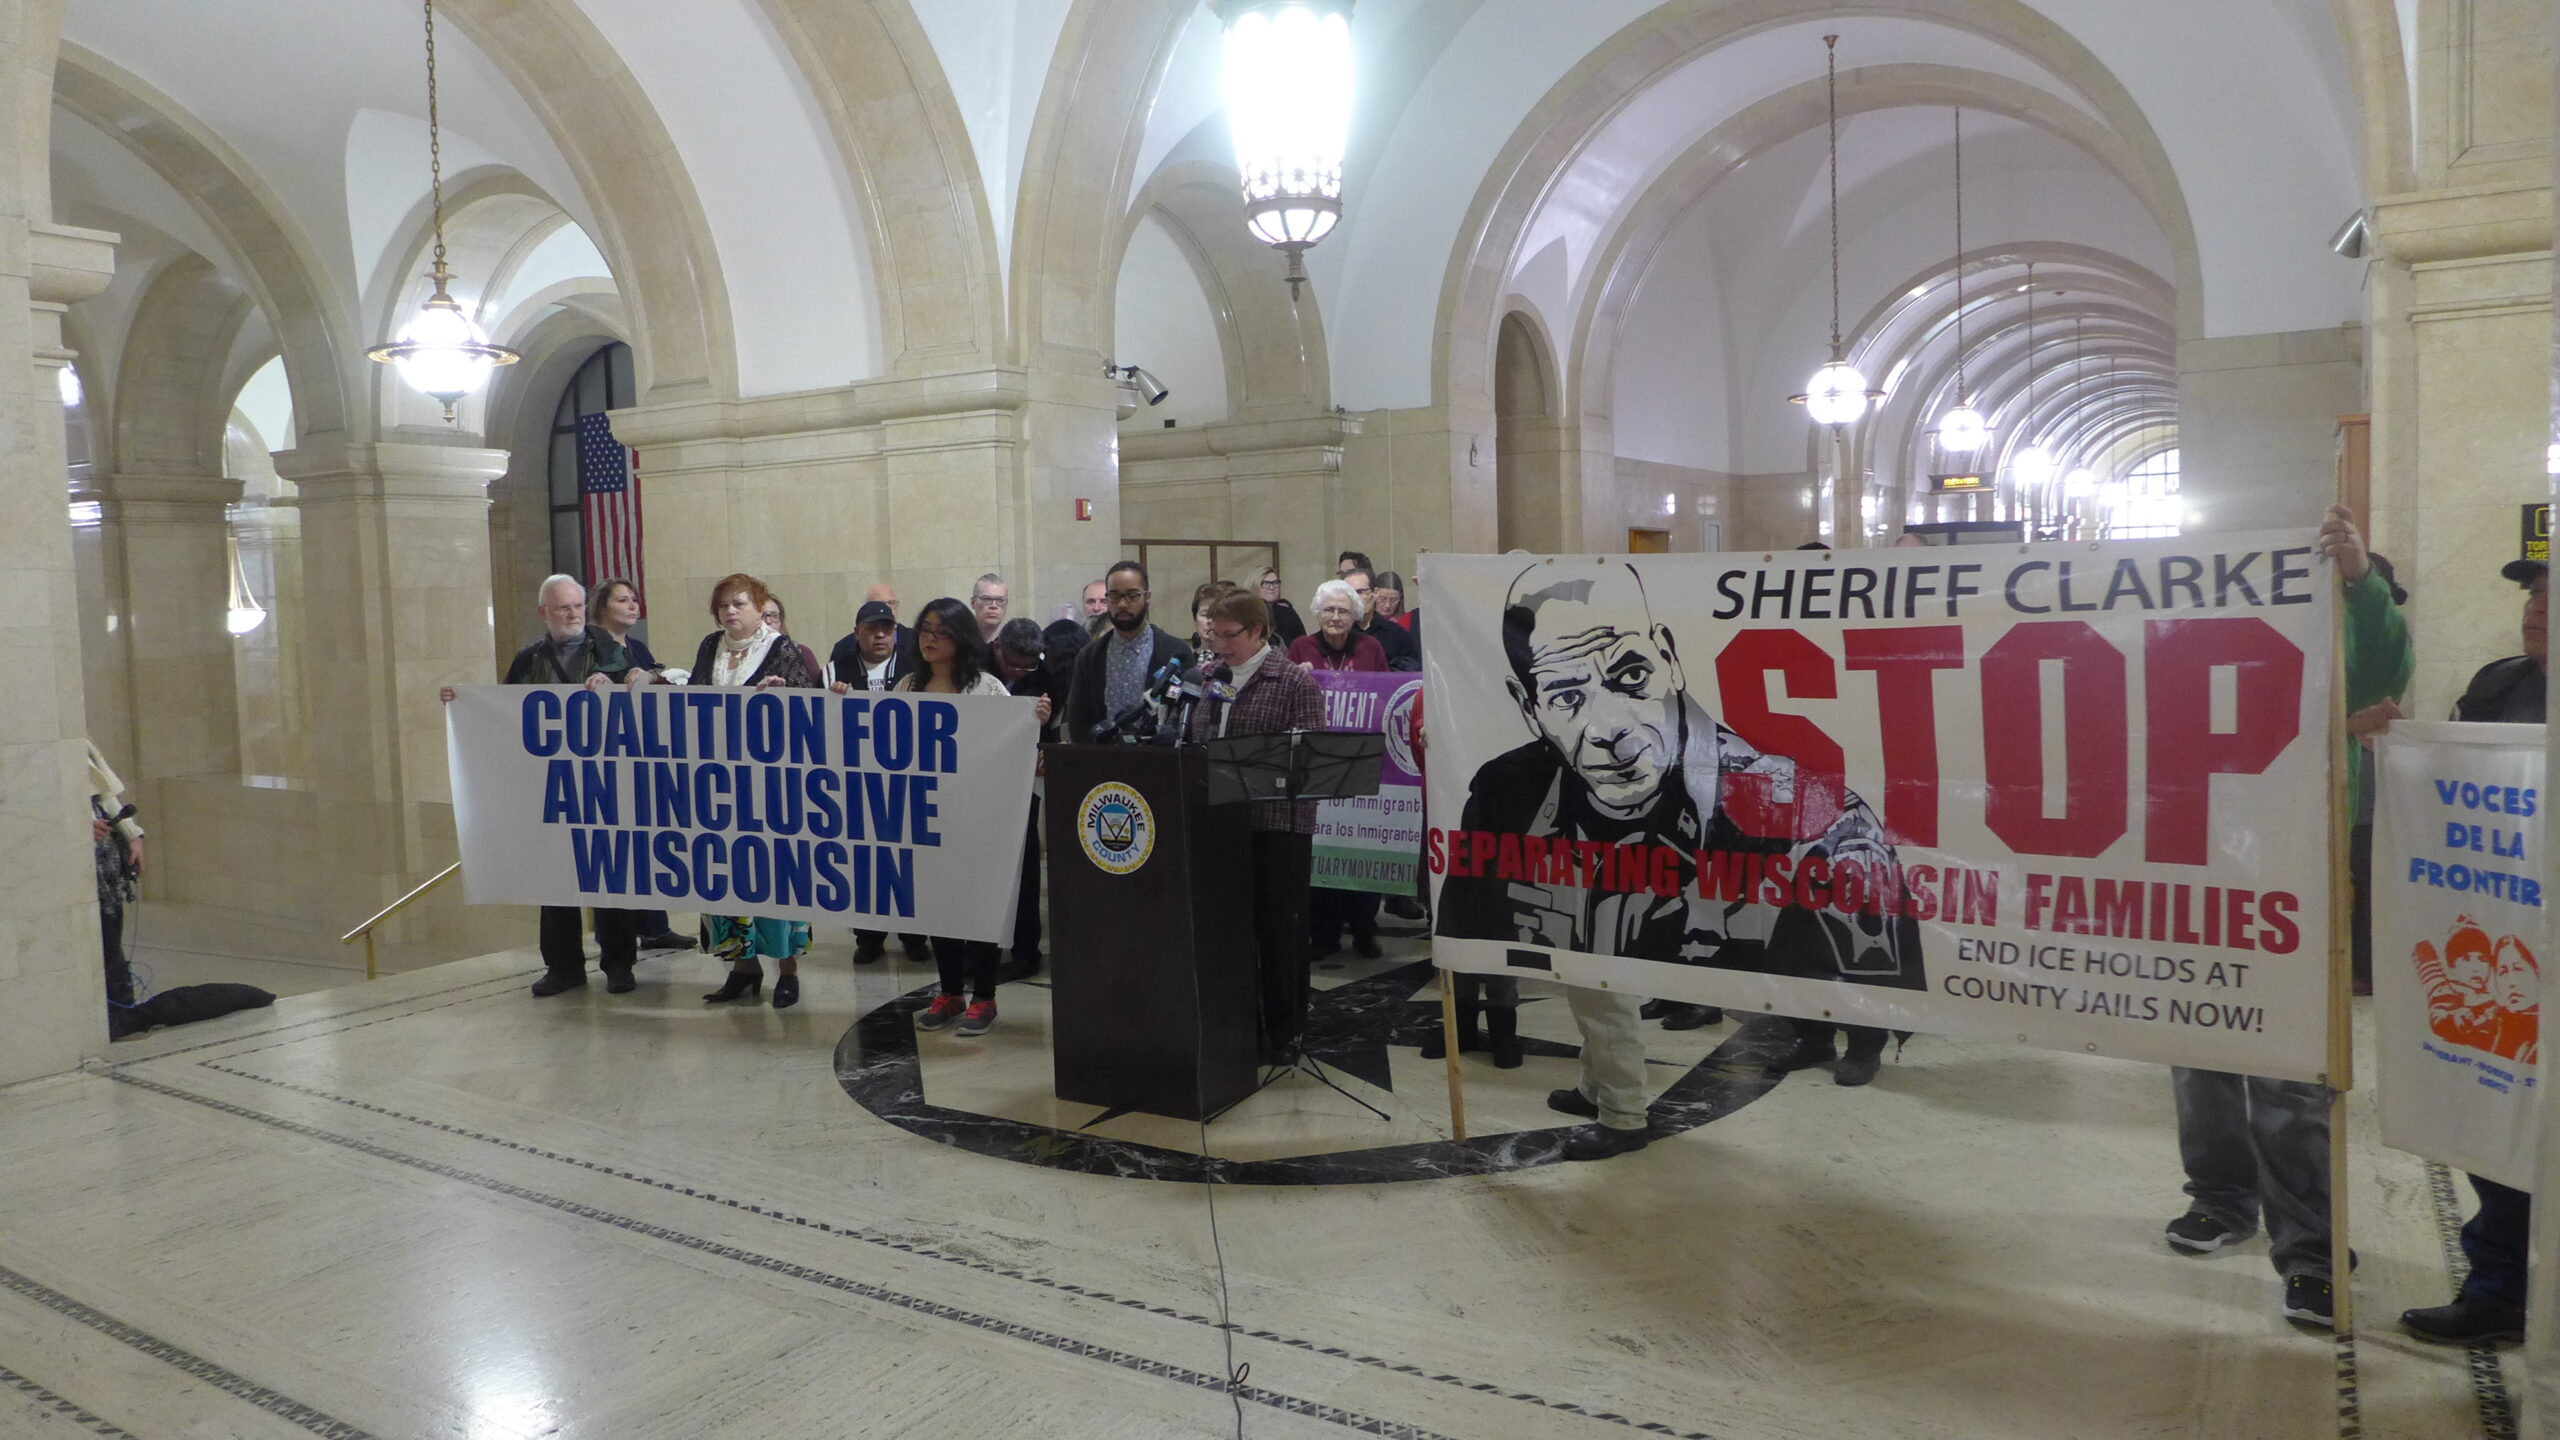 Local groups gather to support anti-discrimination resolution passed in Milwaukee